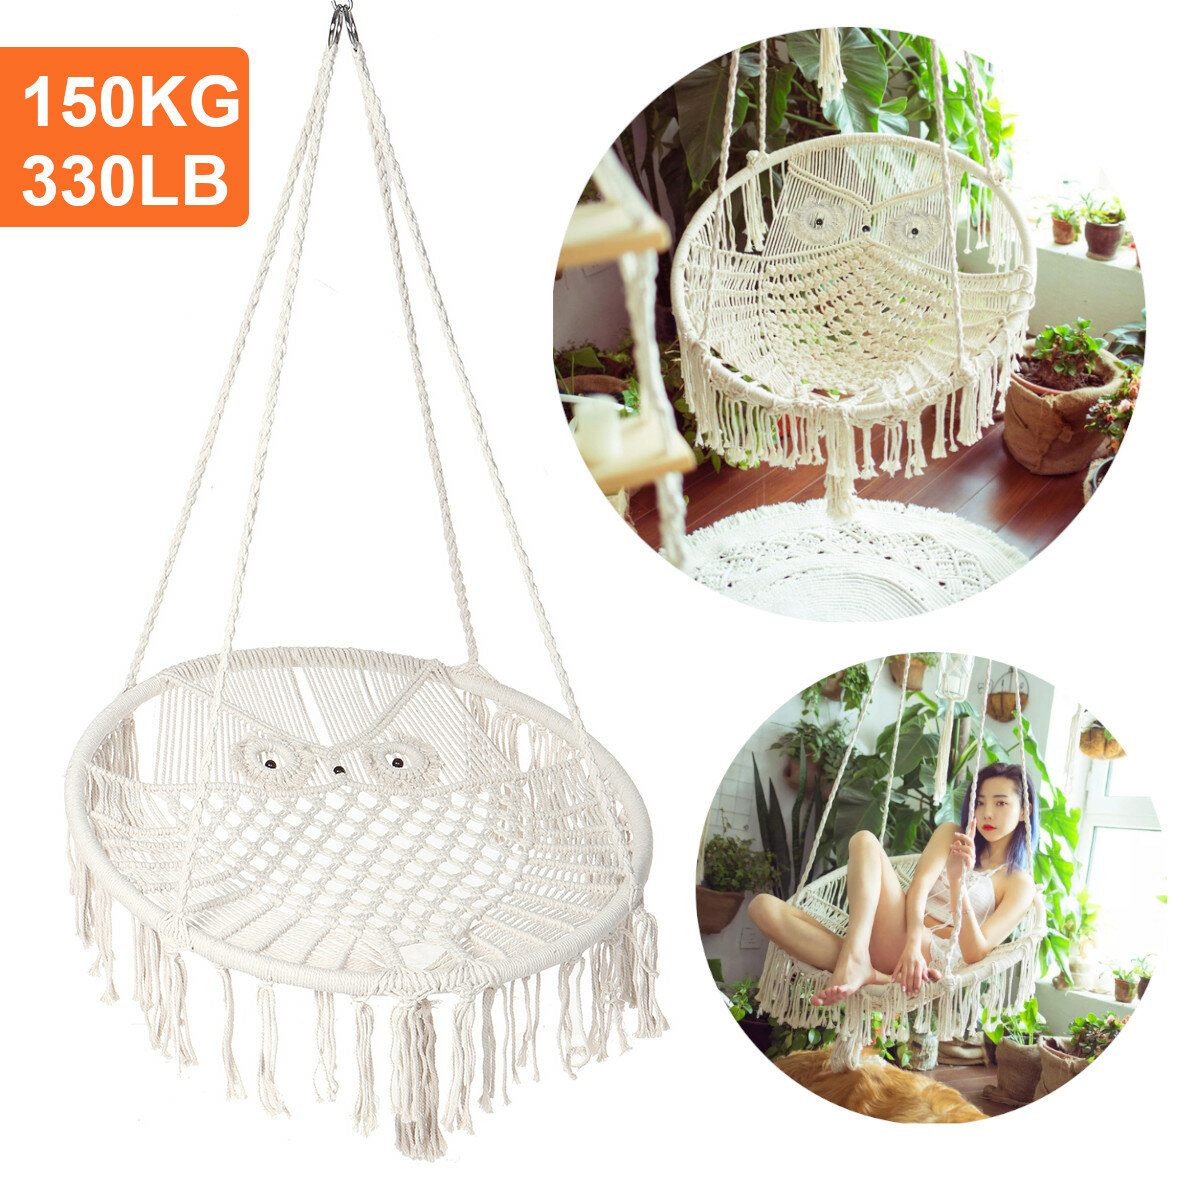 

Owl Mesh Hammock Chair Swing Hanging Chairs Indoor Outdoor Home Max Load 120kg